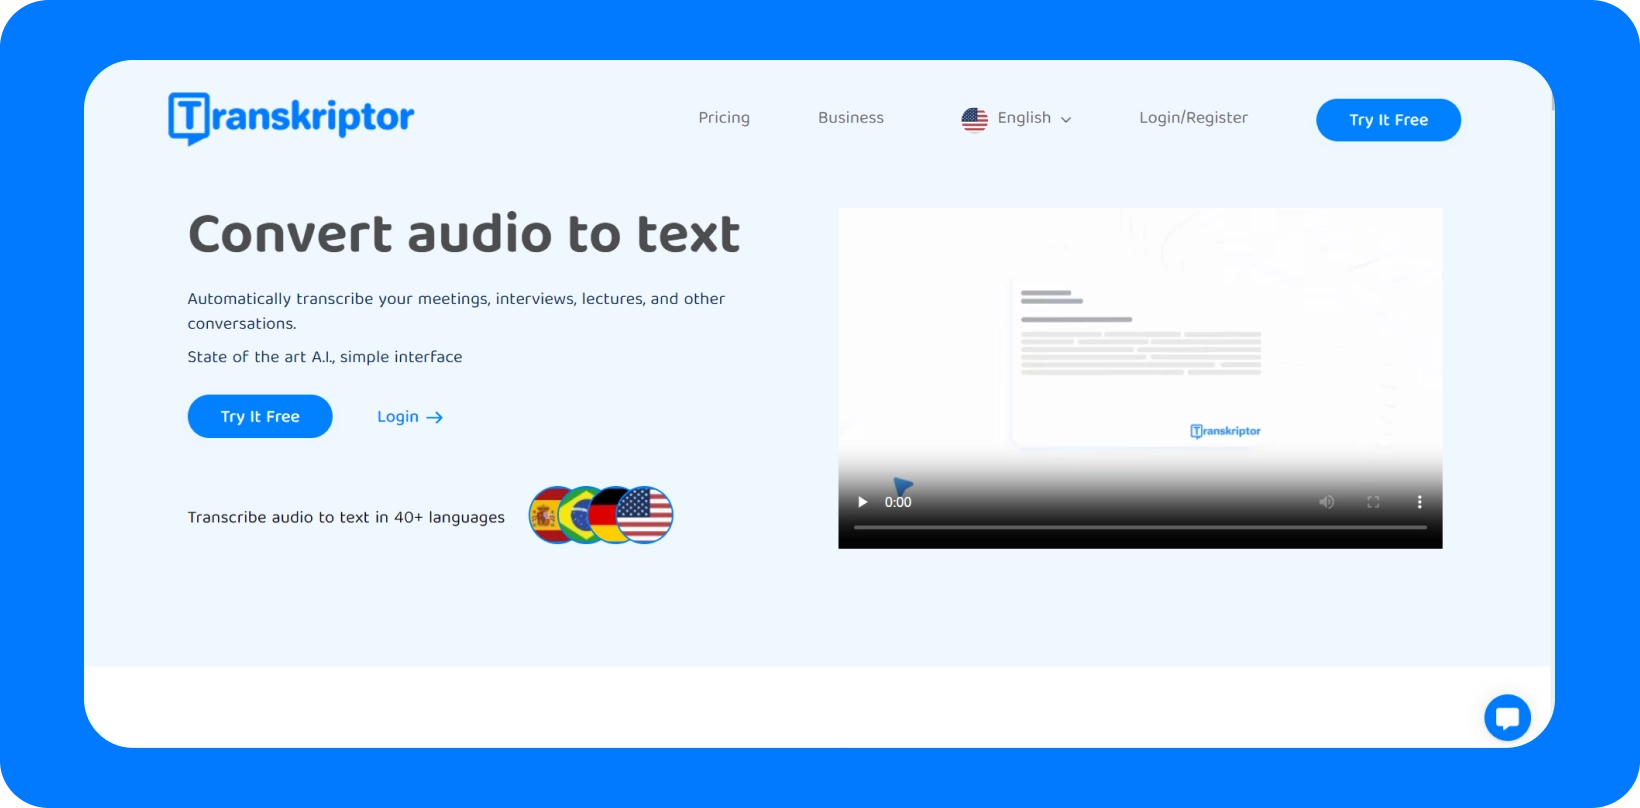 Transkriptor interface showcasing 'Convert audio to text' service with multi-language support.